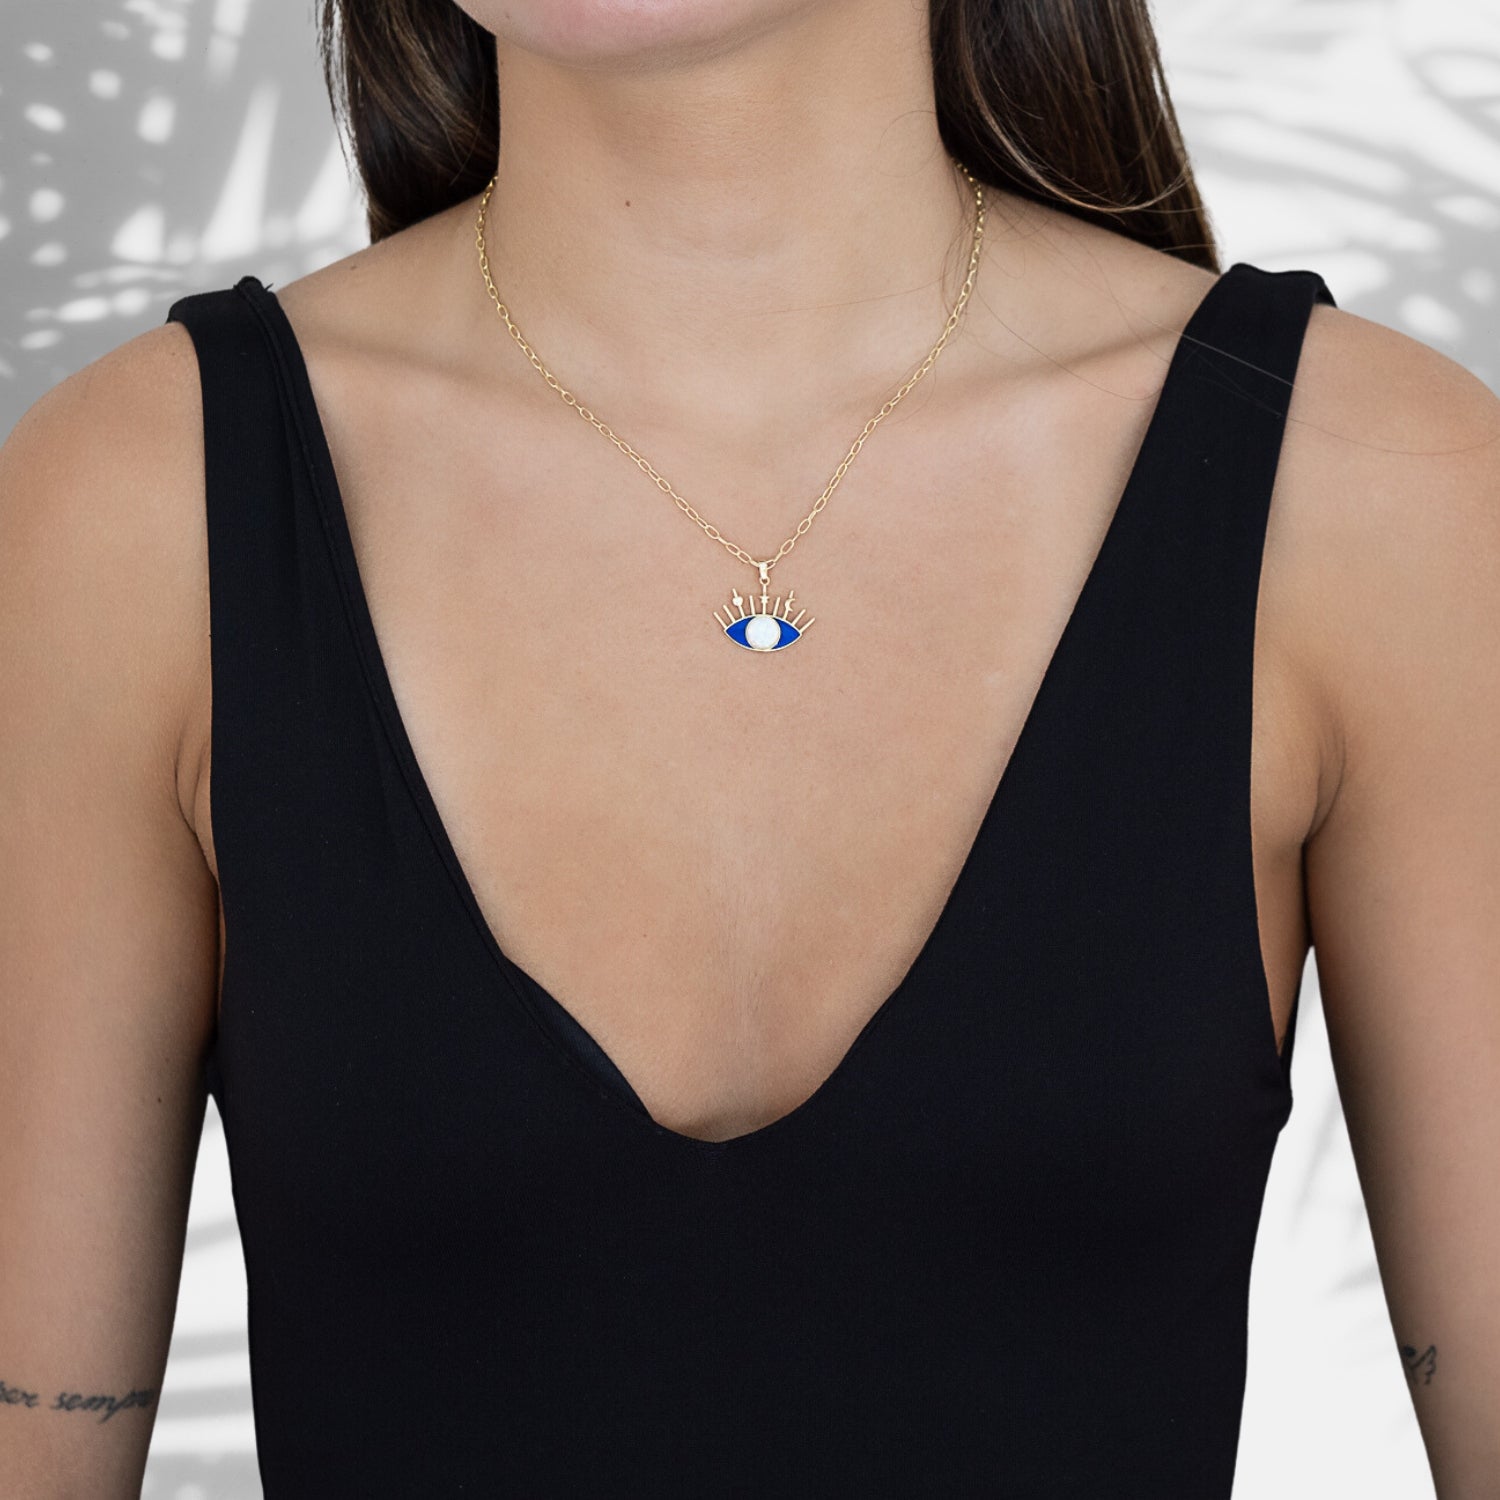 A model wearing the Opal Blue Evil Eye Necklace, radiating style and spiritual energy.